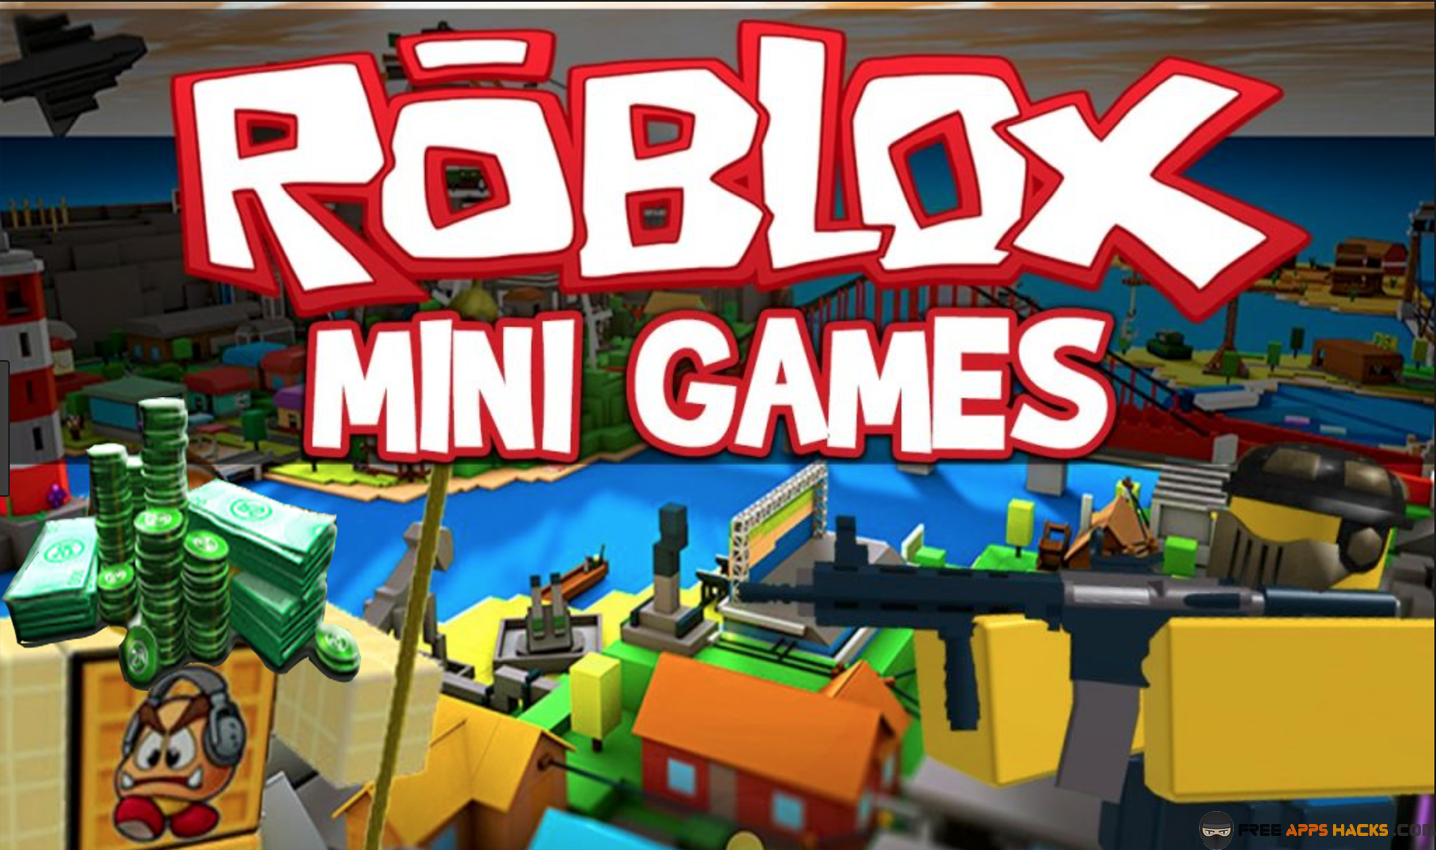 Roblox Modded APK Free Android App - Free App Hacks